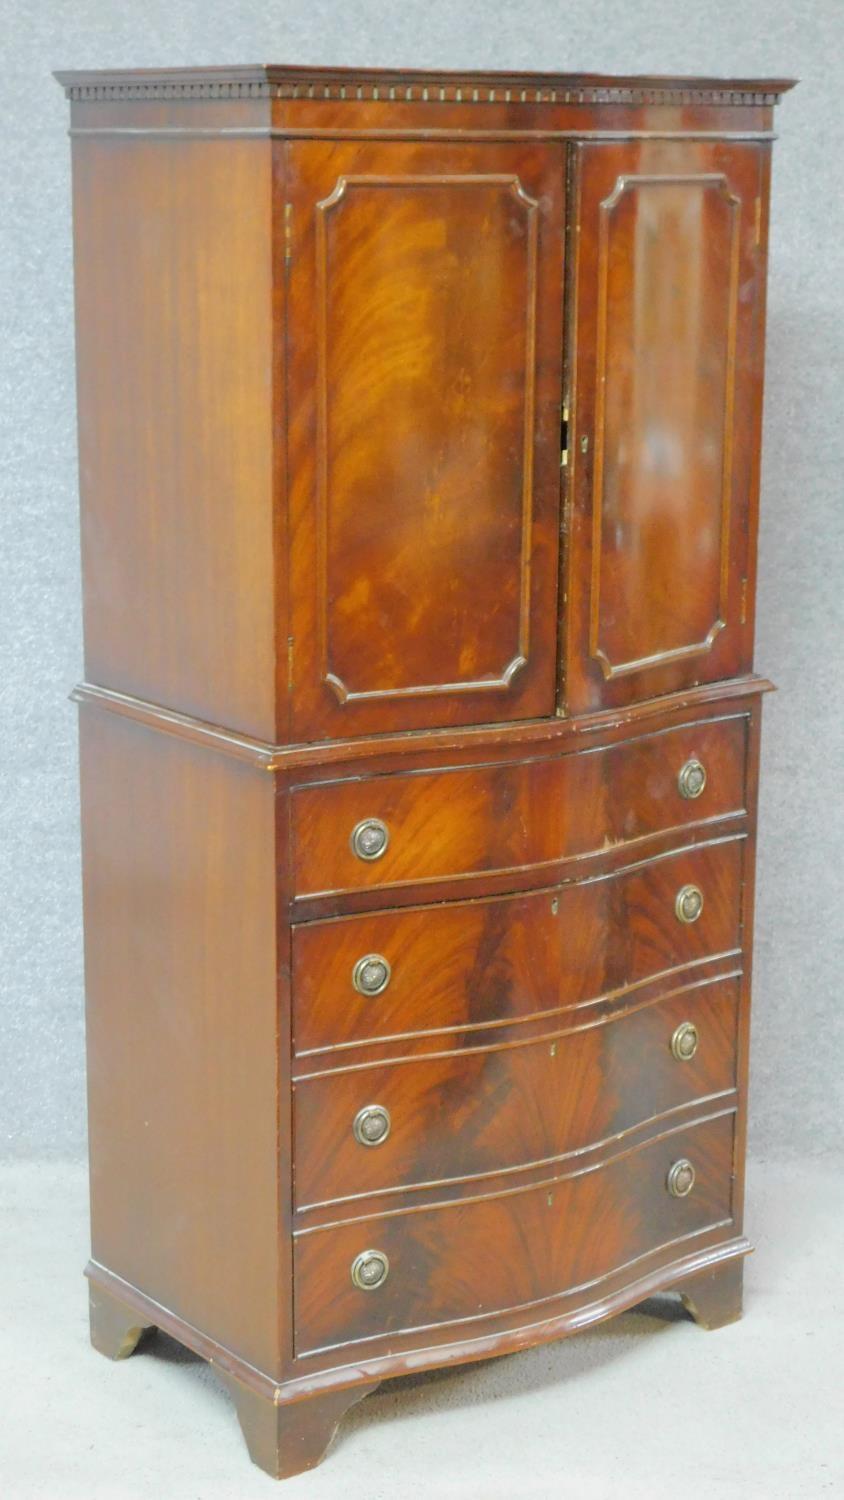 A Georgian style flame mahogany tallboy with panel doors enclosing shelves above drawer and panel